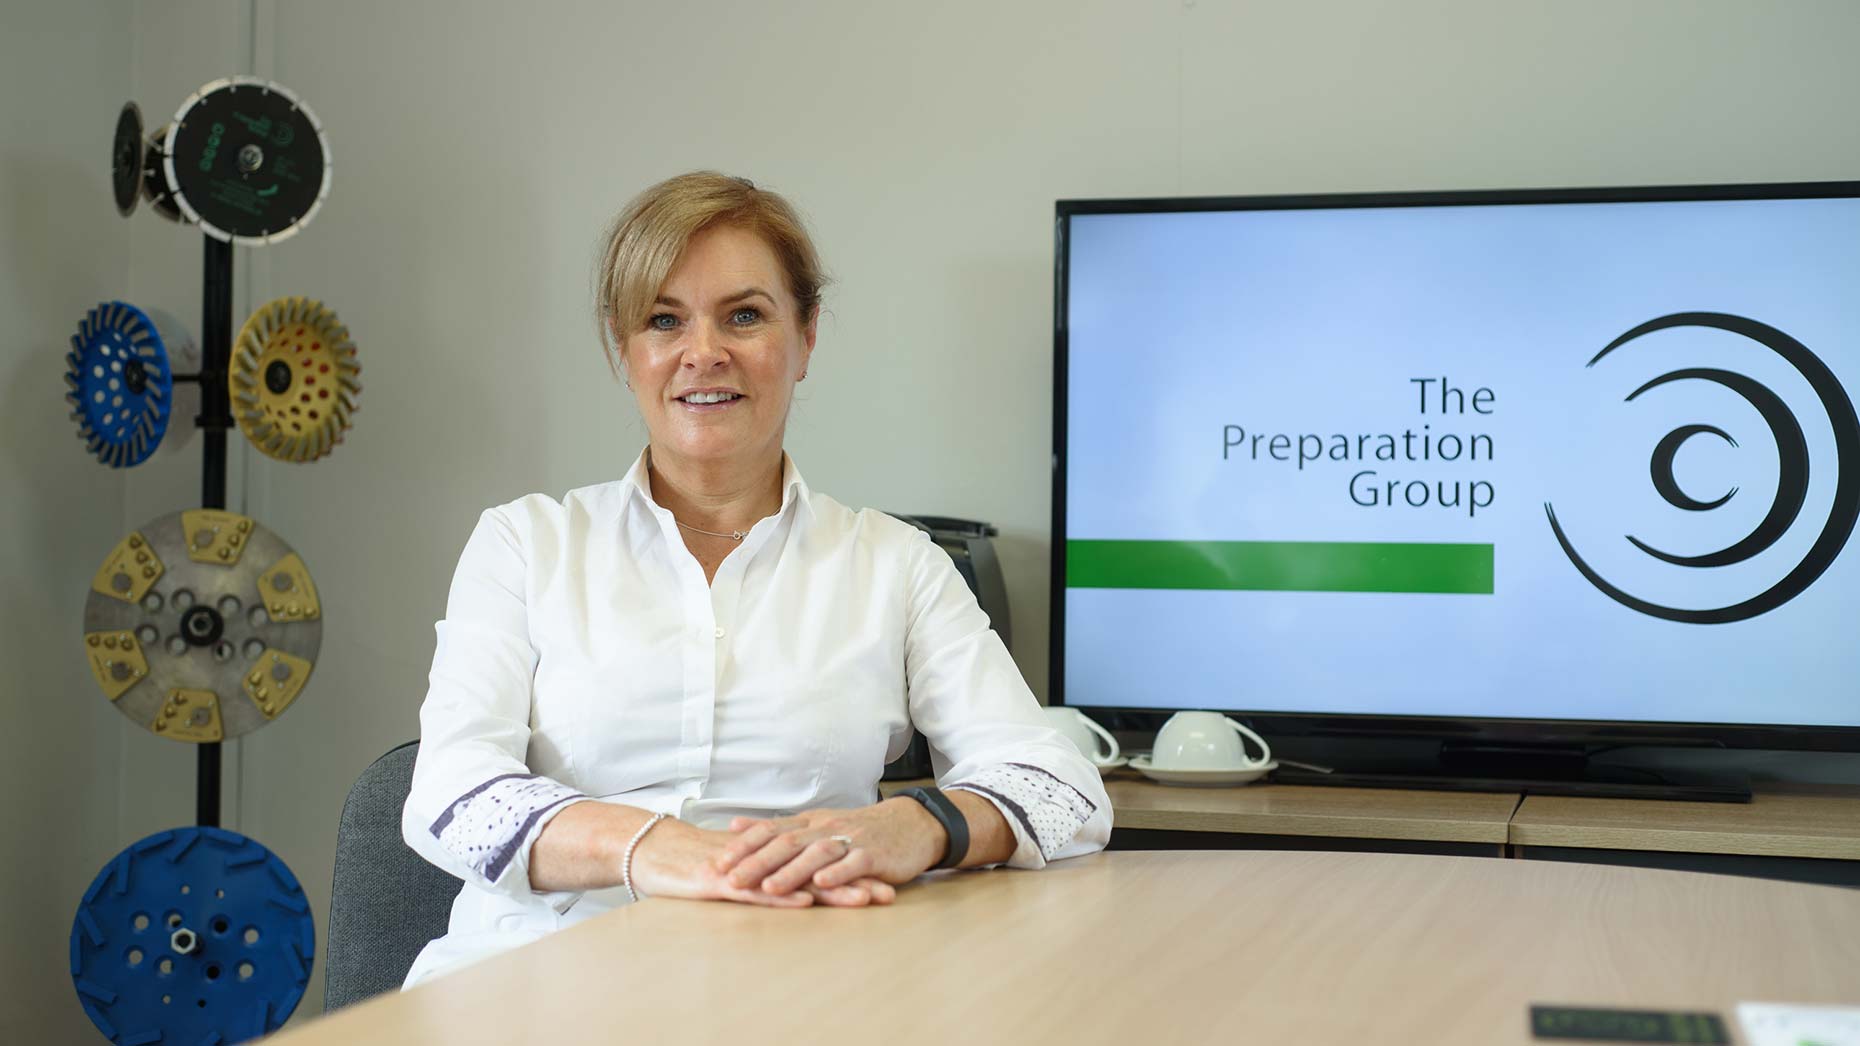 Tracey Glew, Founder of The Preparation Group